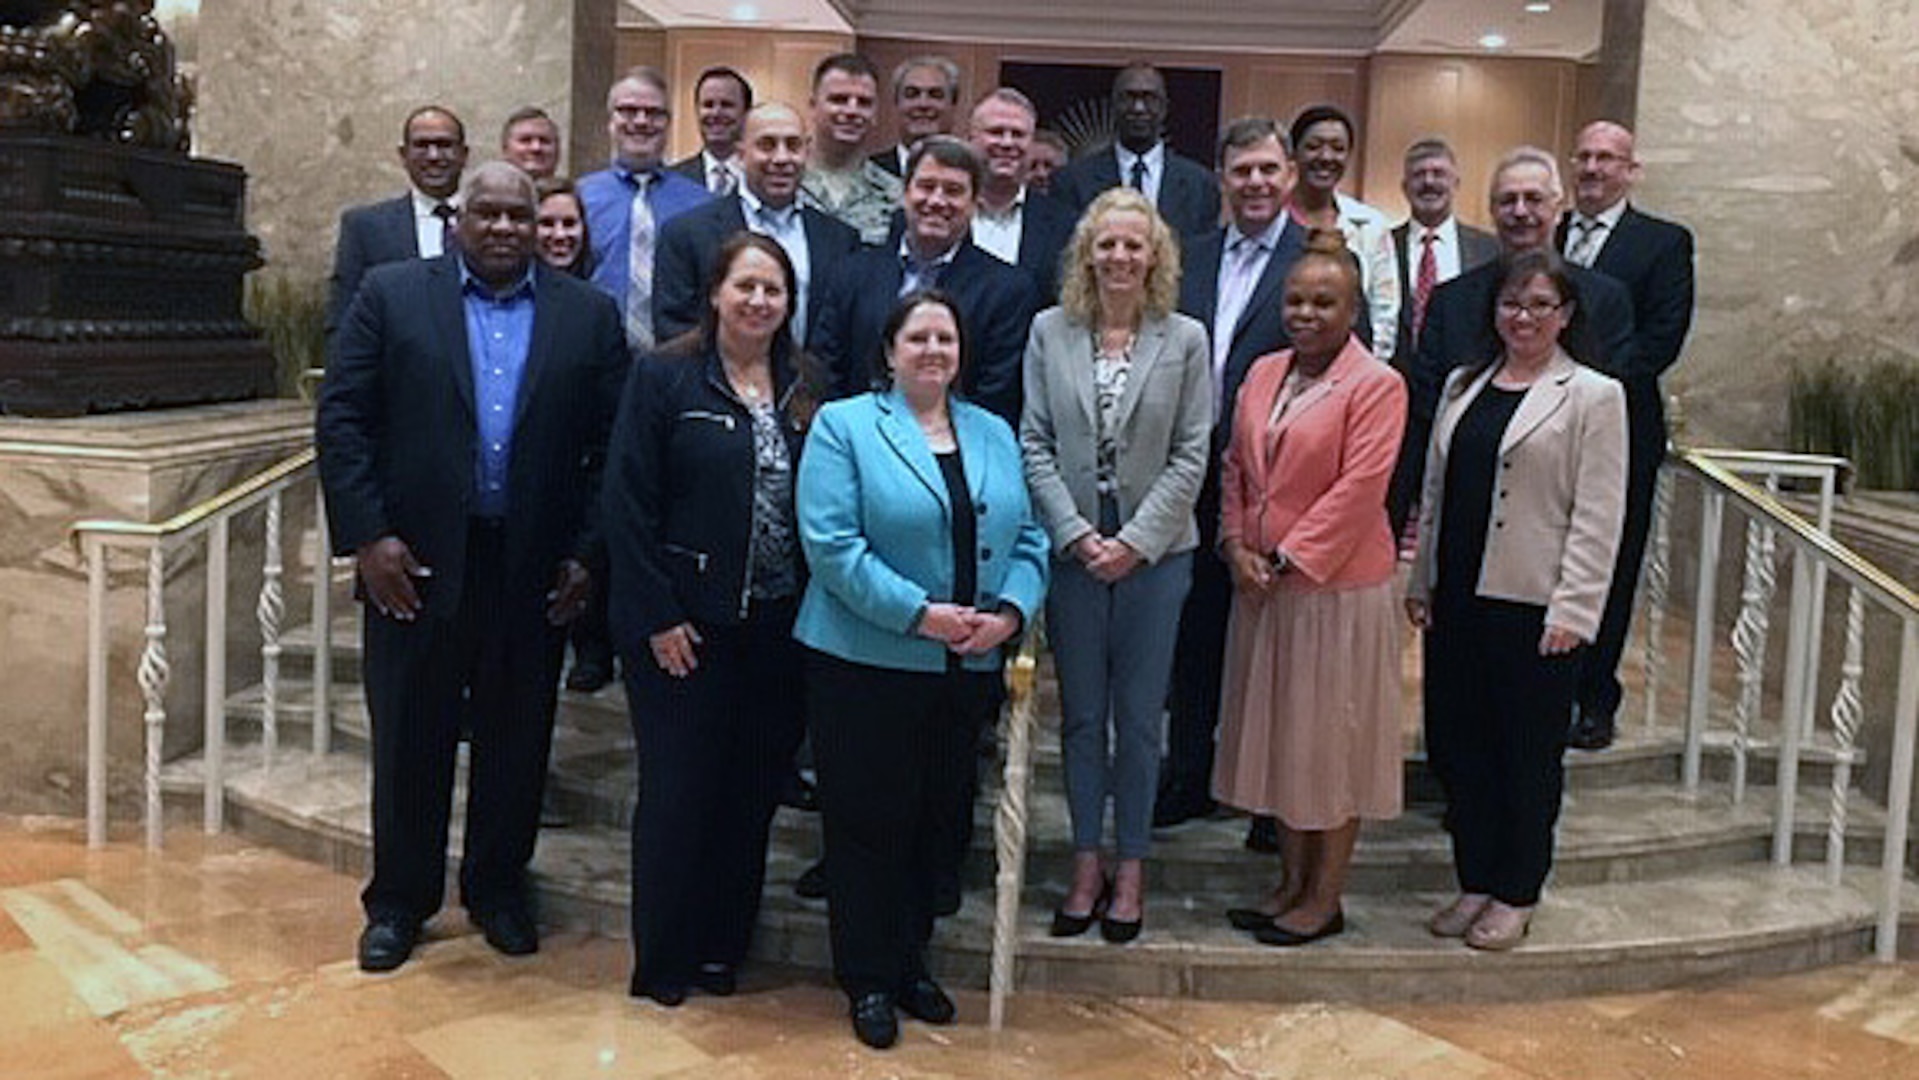 A group photo of DLA and DoD information technology professionals meeting to share business system practices efficiencies.